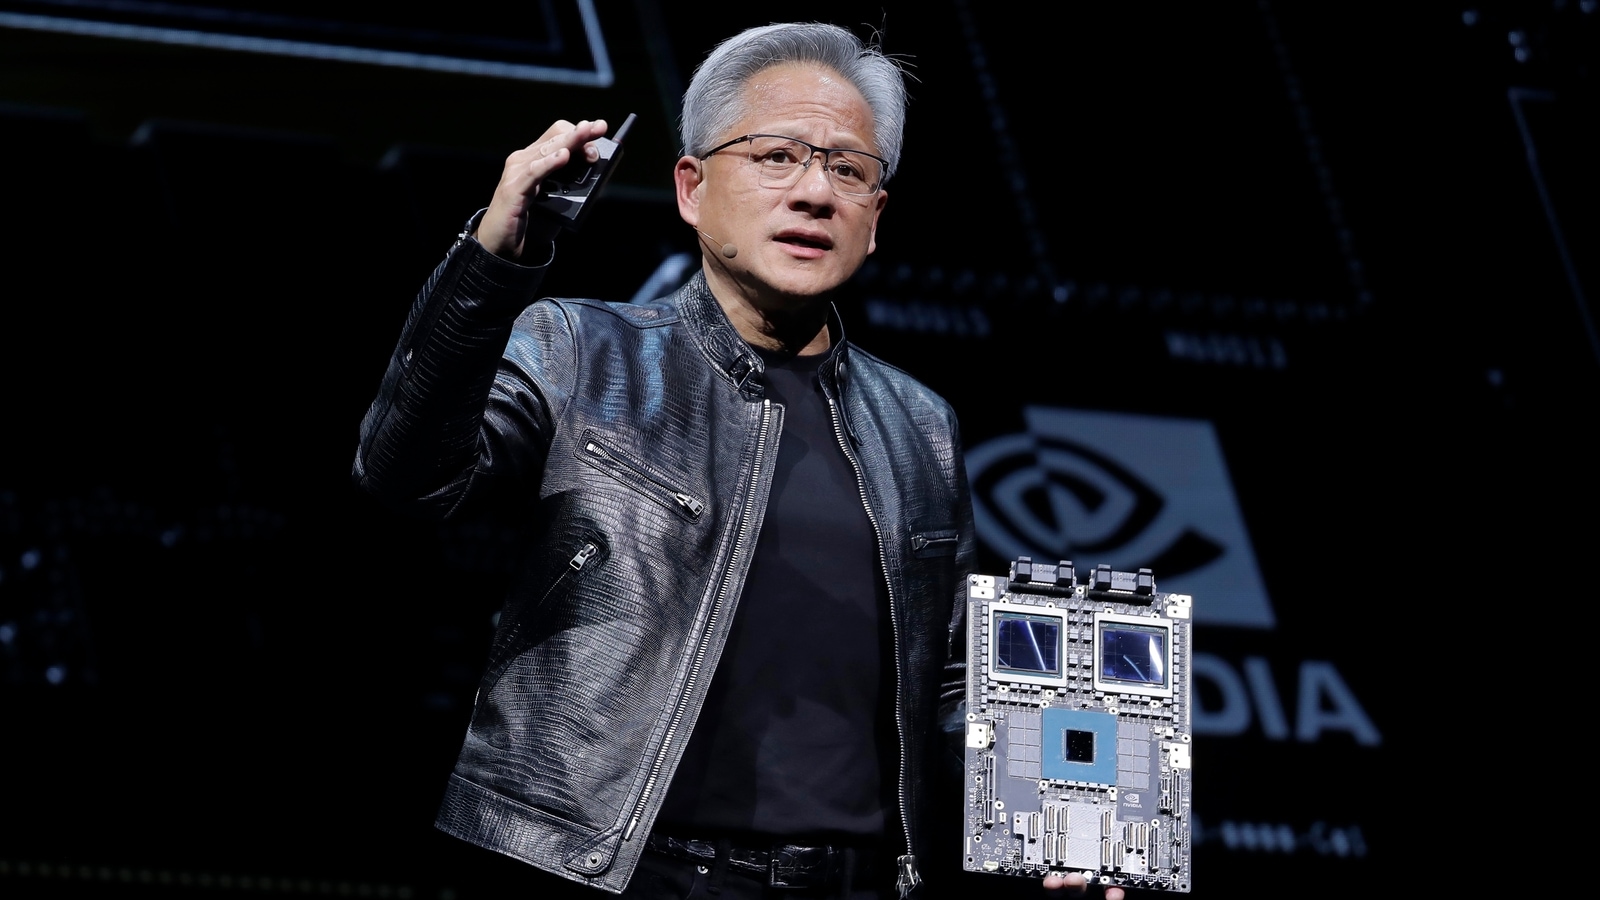 Report: Jensen Huang’s Nvidia could be worth more than the current S&P 500 index value in ten years